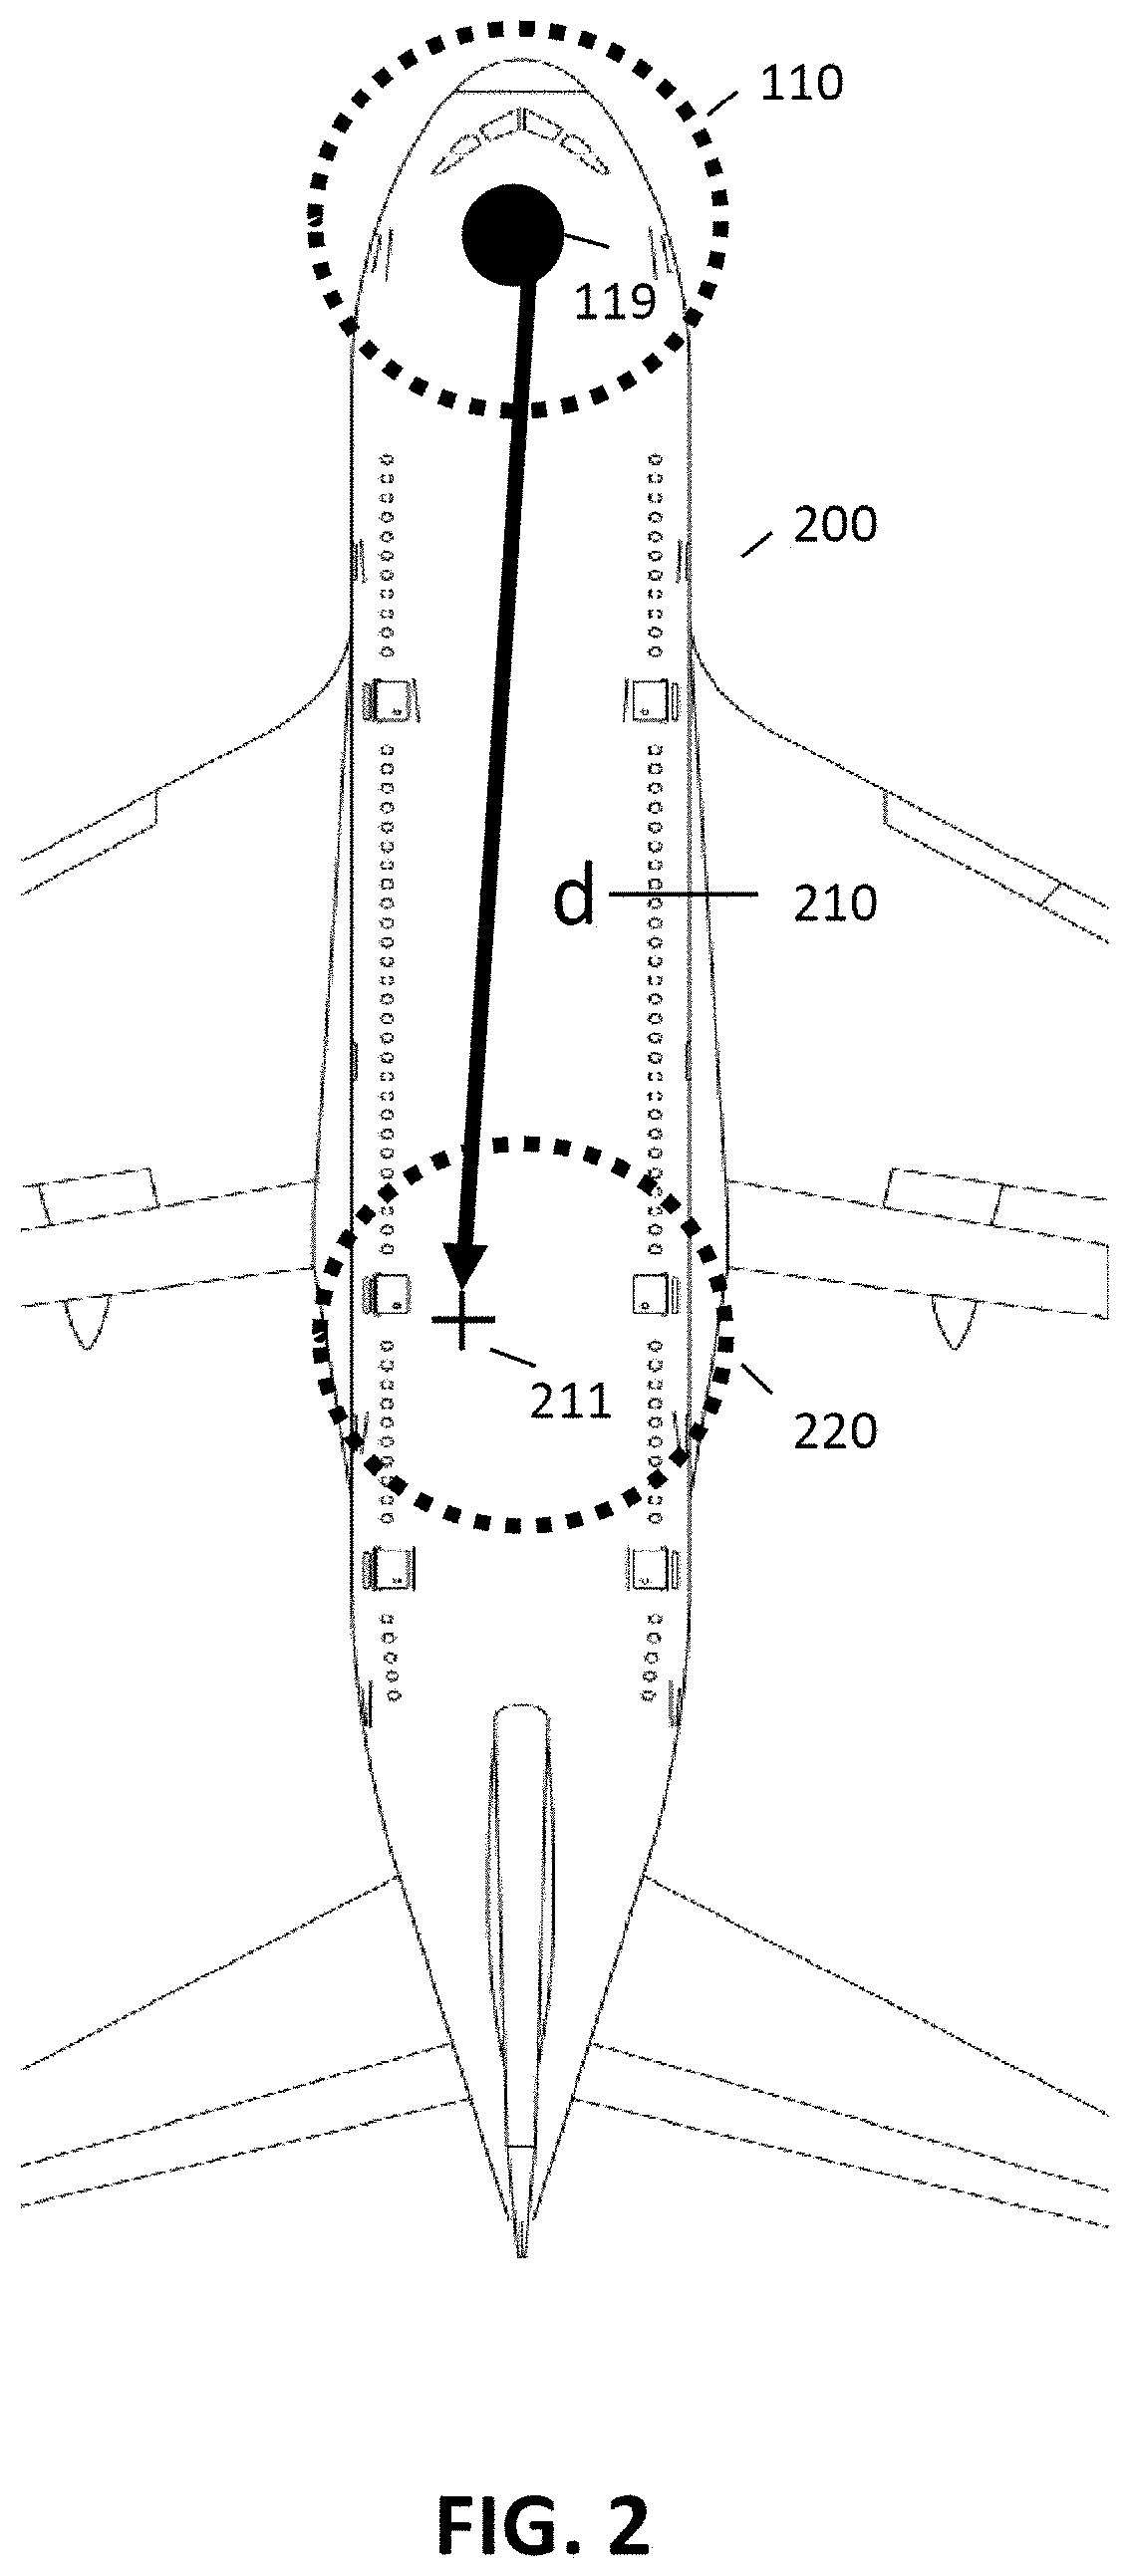 Continuity of access to avionic data outside of the cockpit of an aircraft